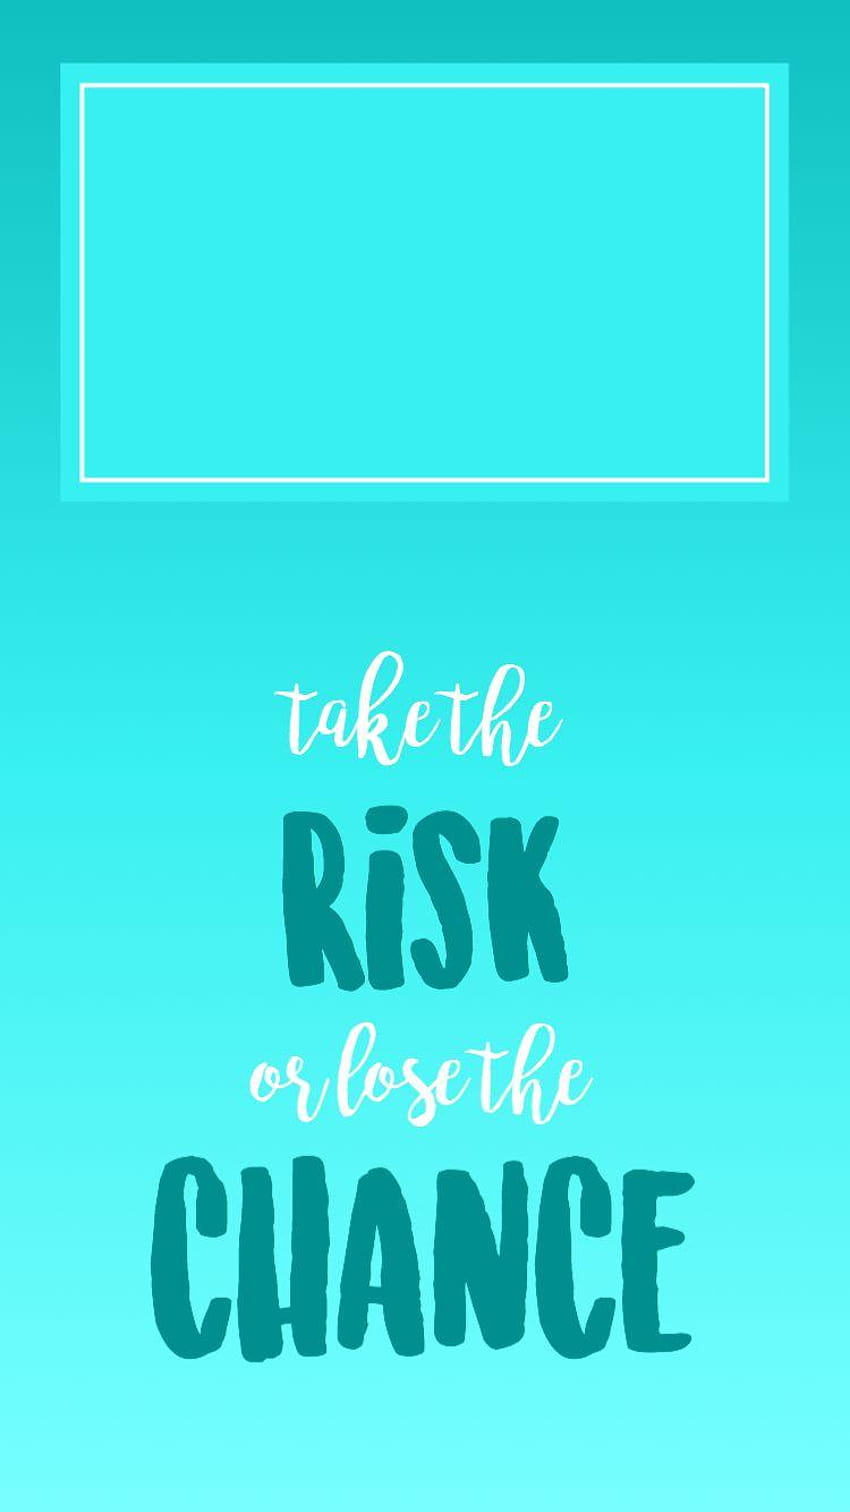 Cute Teal Mint Green Aqua Take the risk or lose the chance Time HD phone wallpaper